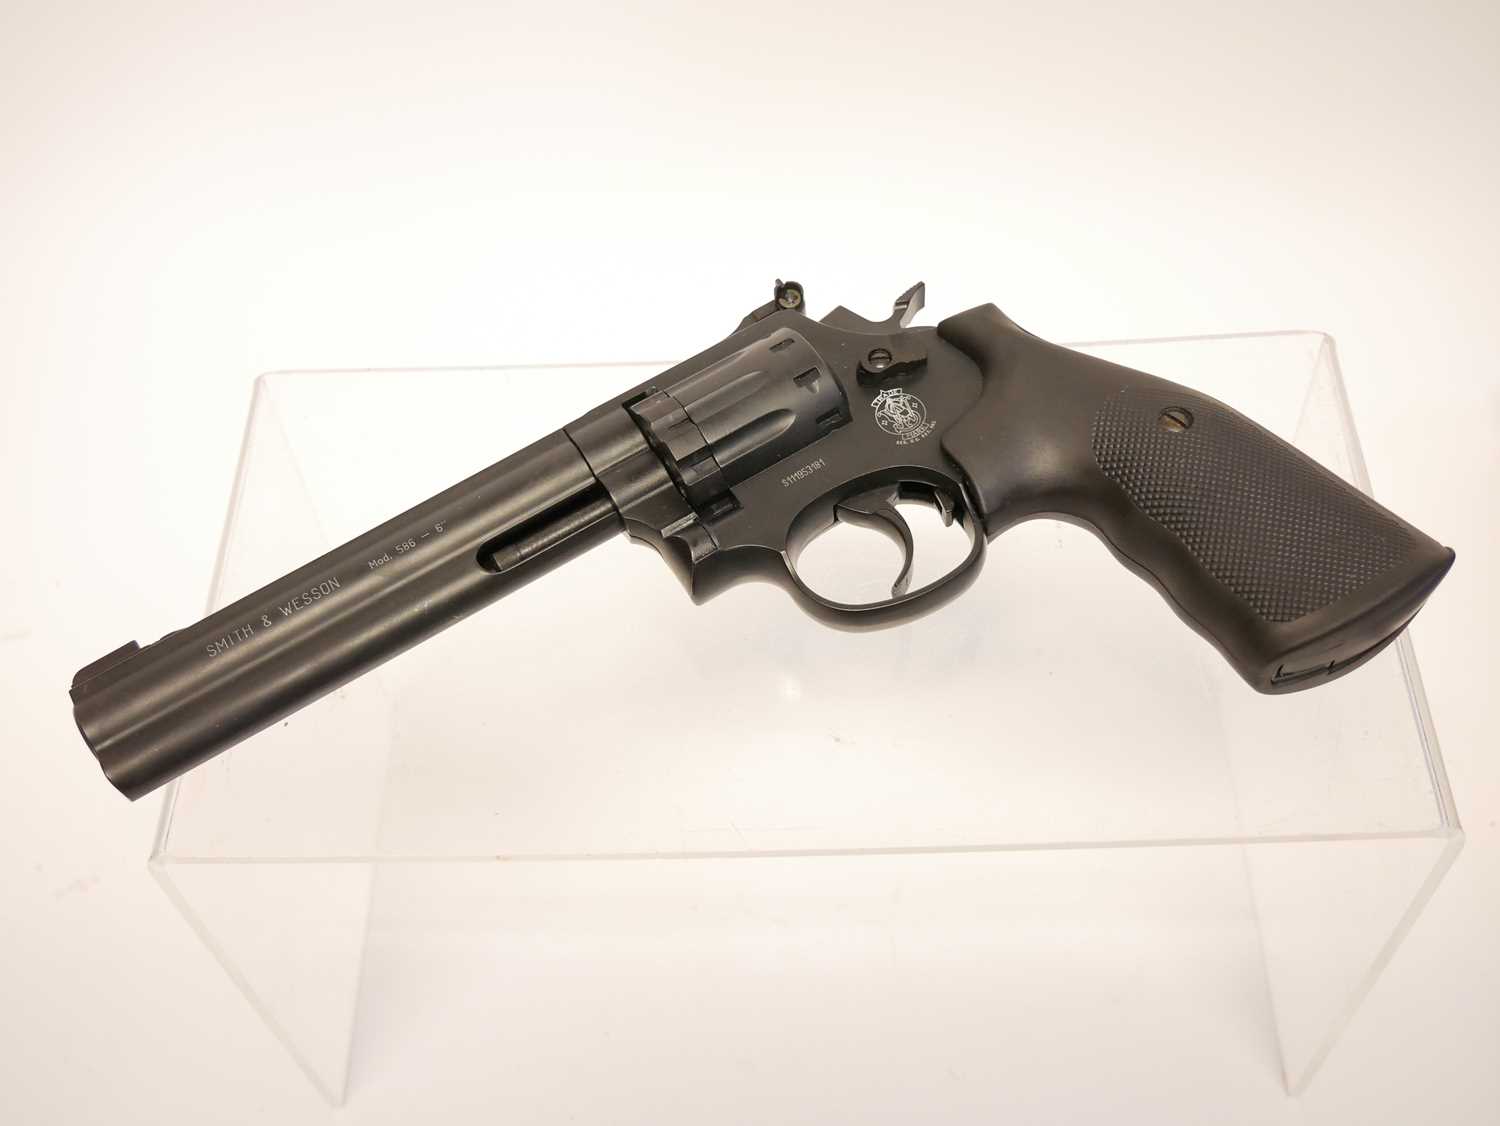 Smith and Wesson Umarex Model 586 - 6" .177 CO2 air pistol revolver, serial number S111953181, - Image 4 of 7